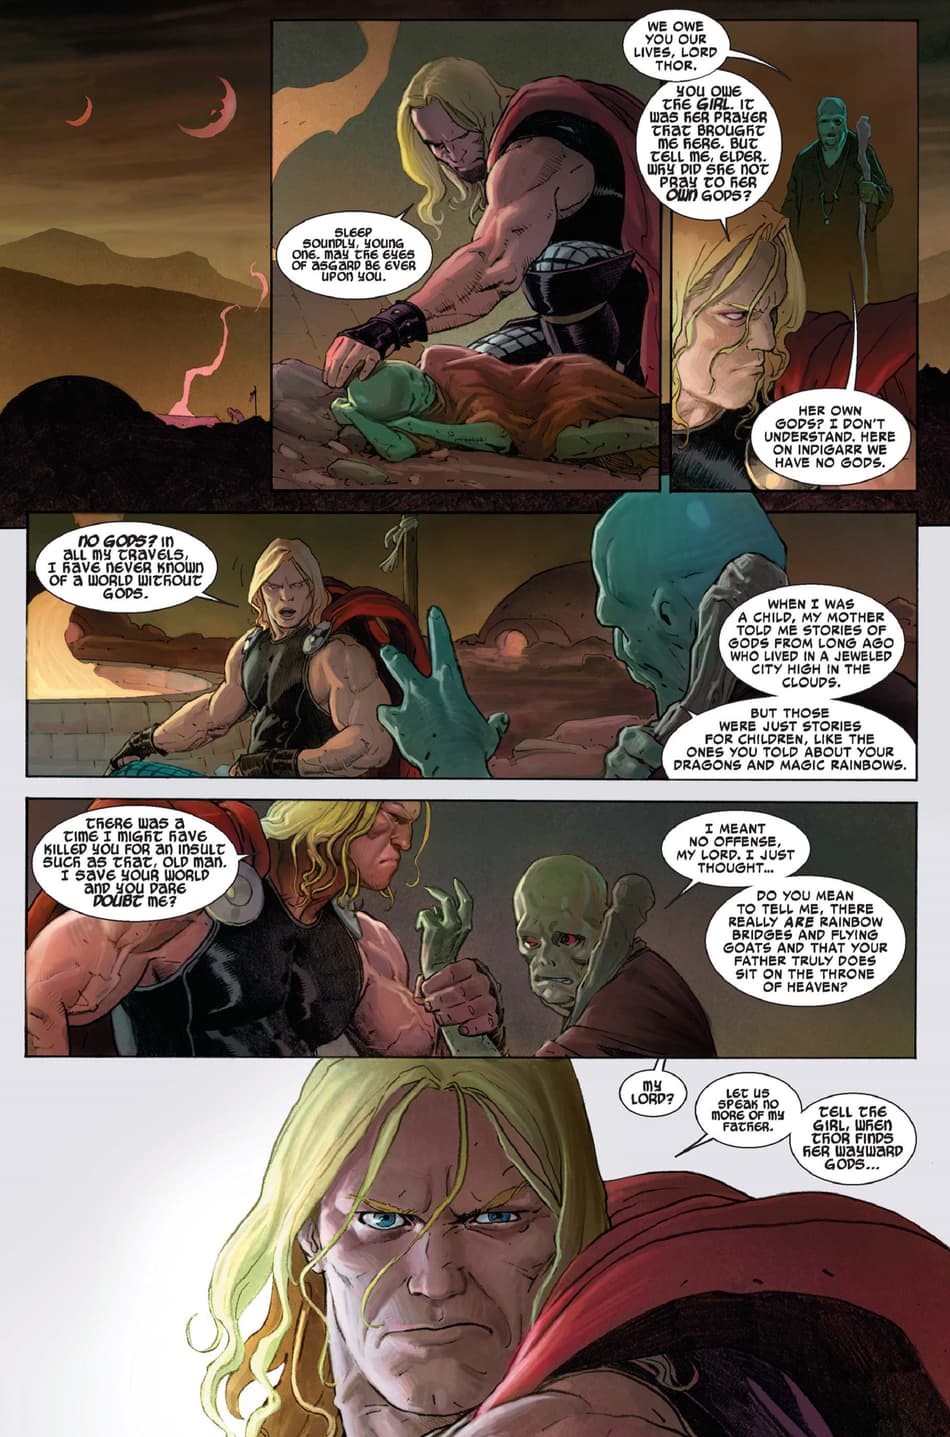 Thor hears about Gorr for the first time in THOR: GOD OF THUNDER (2012) #1.